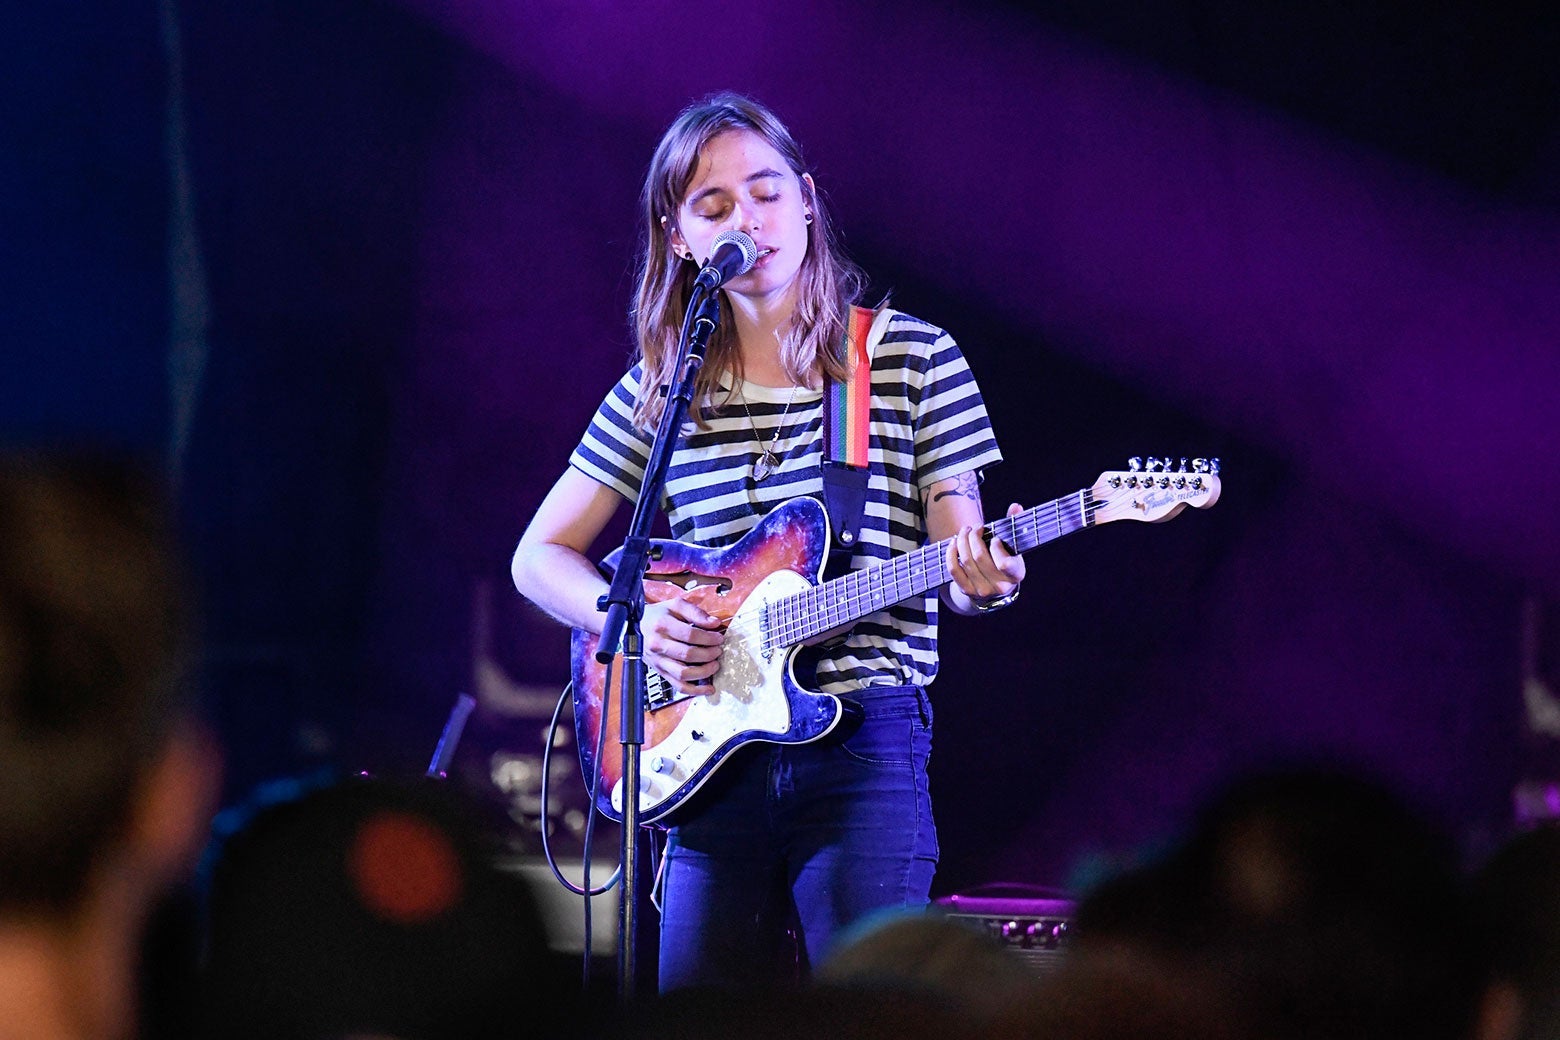 A young white woman with shoulder-length hair plays guitar and sings into a microphone.